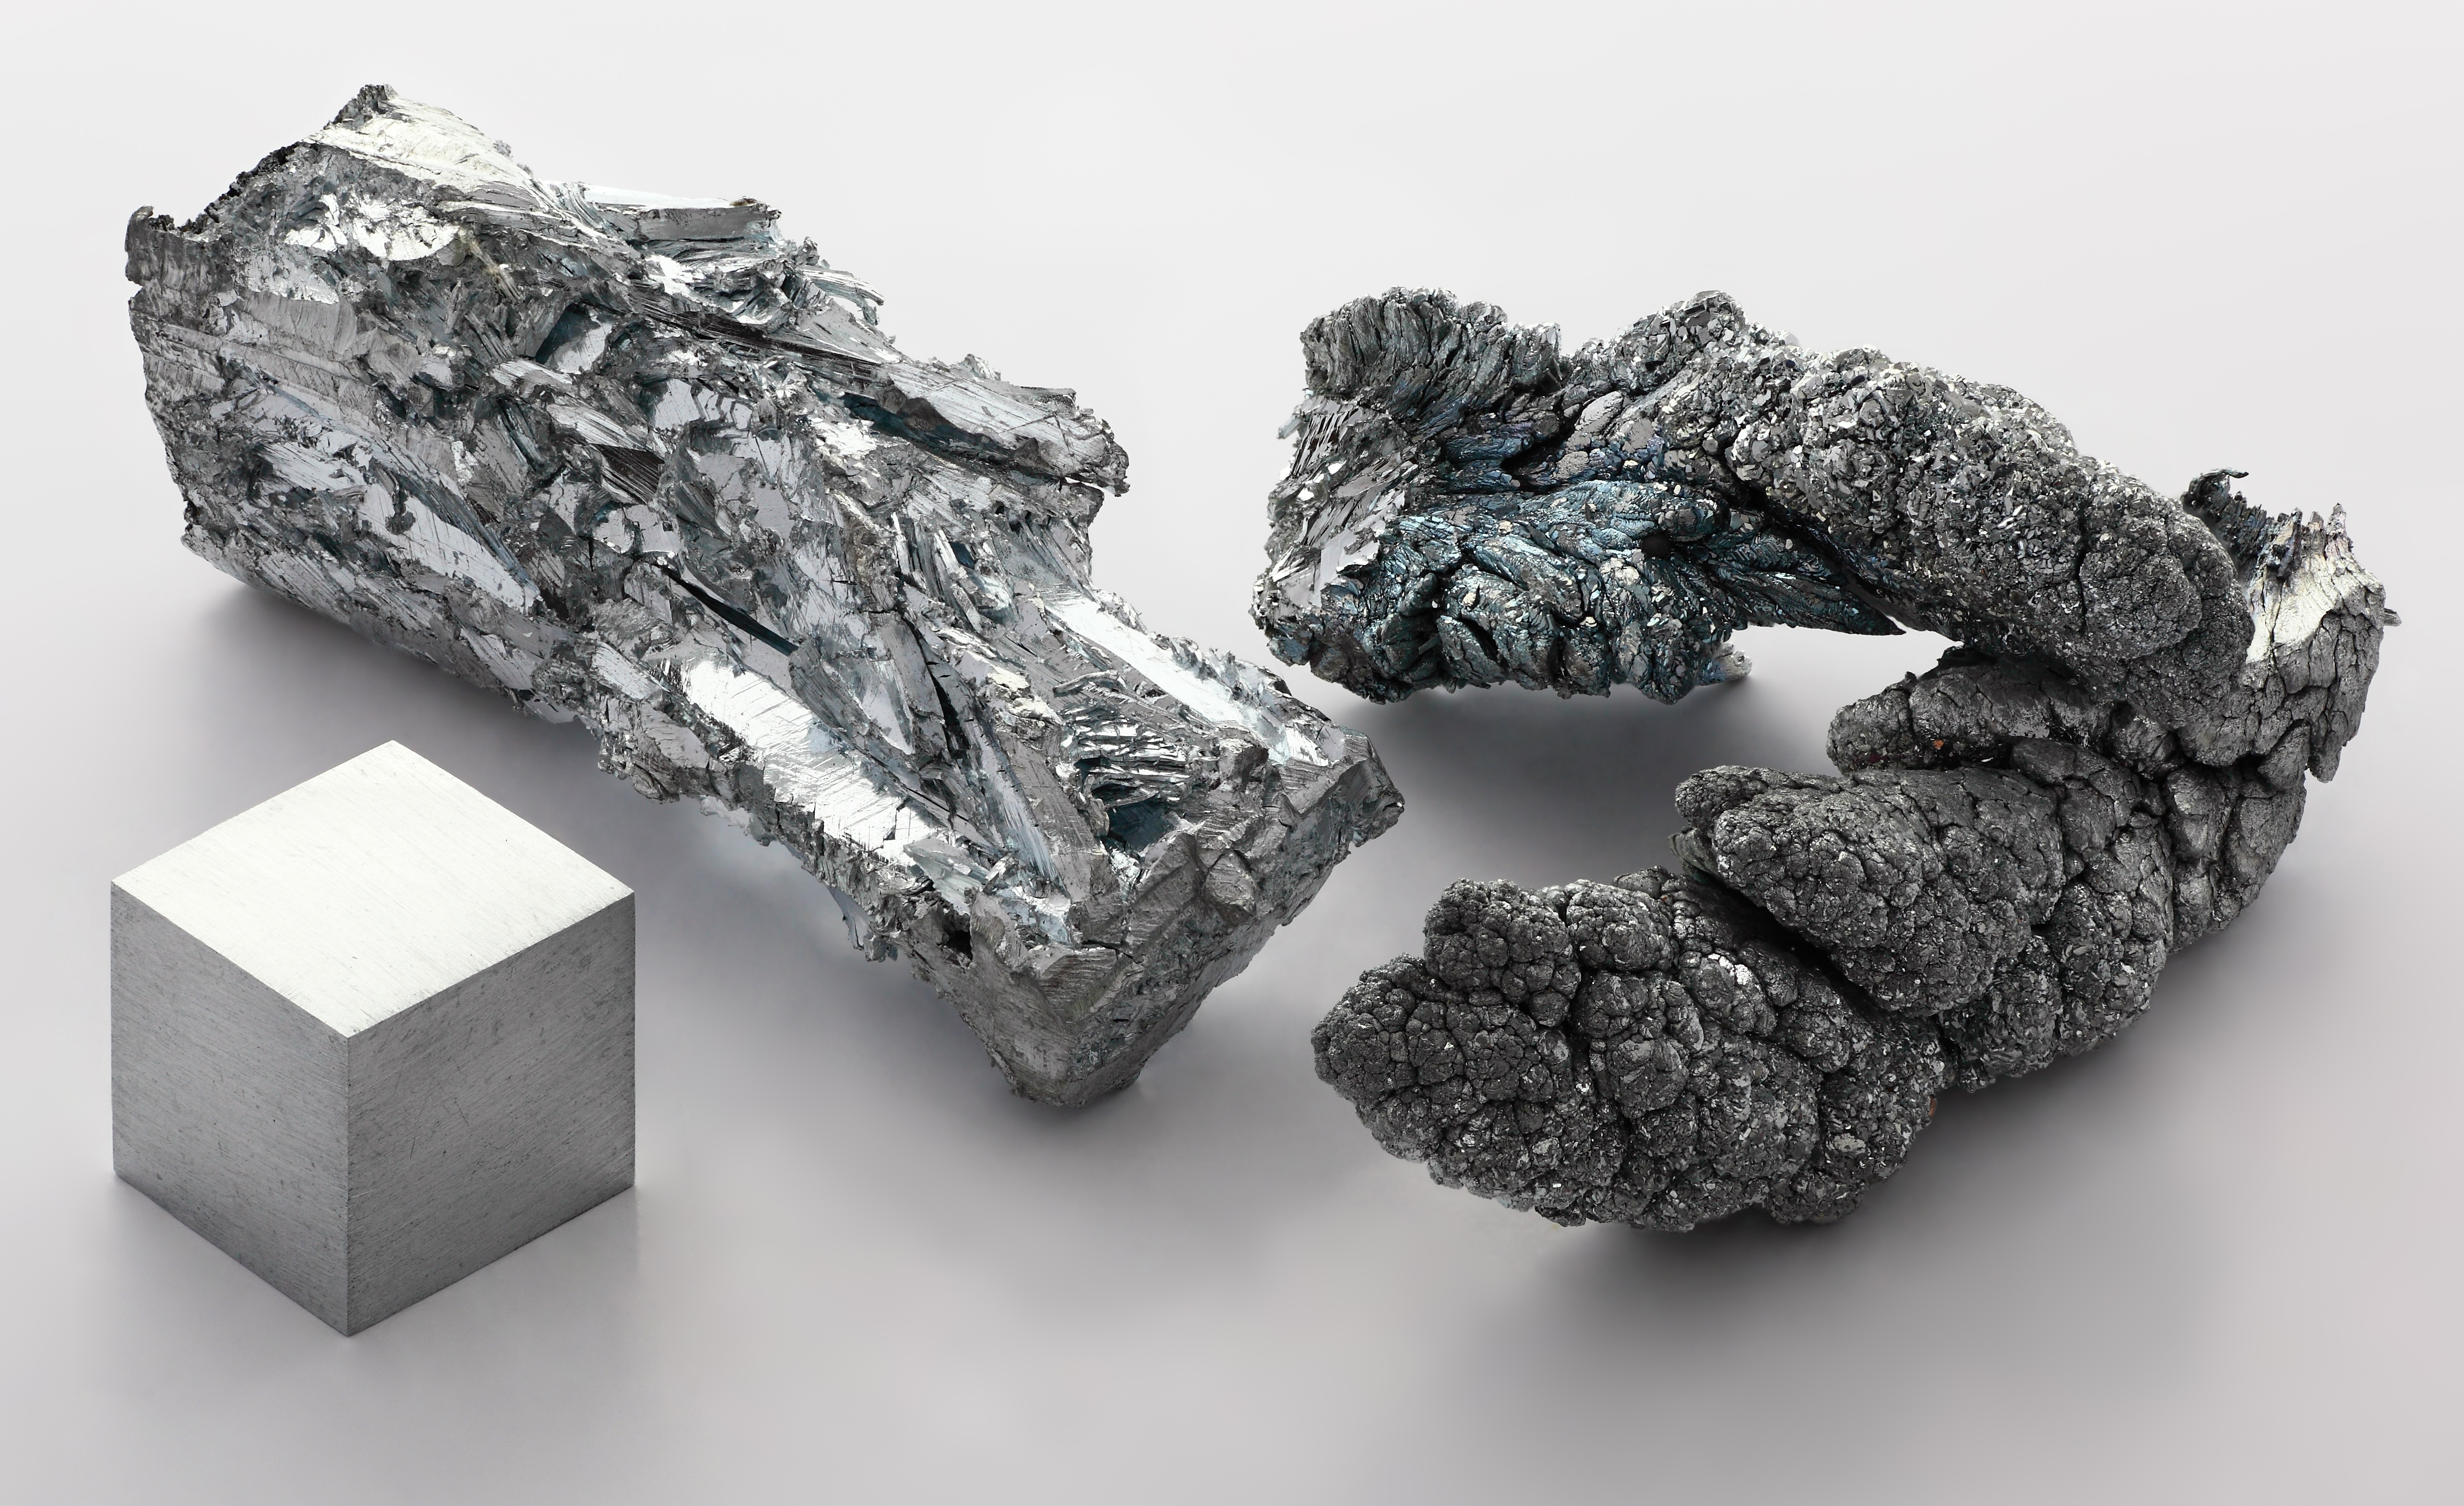 which element is likely to be the most brittle? selenium cobalt platinum zinc